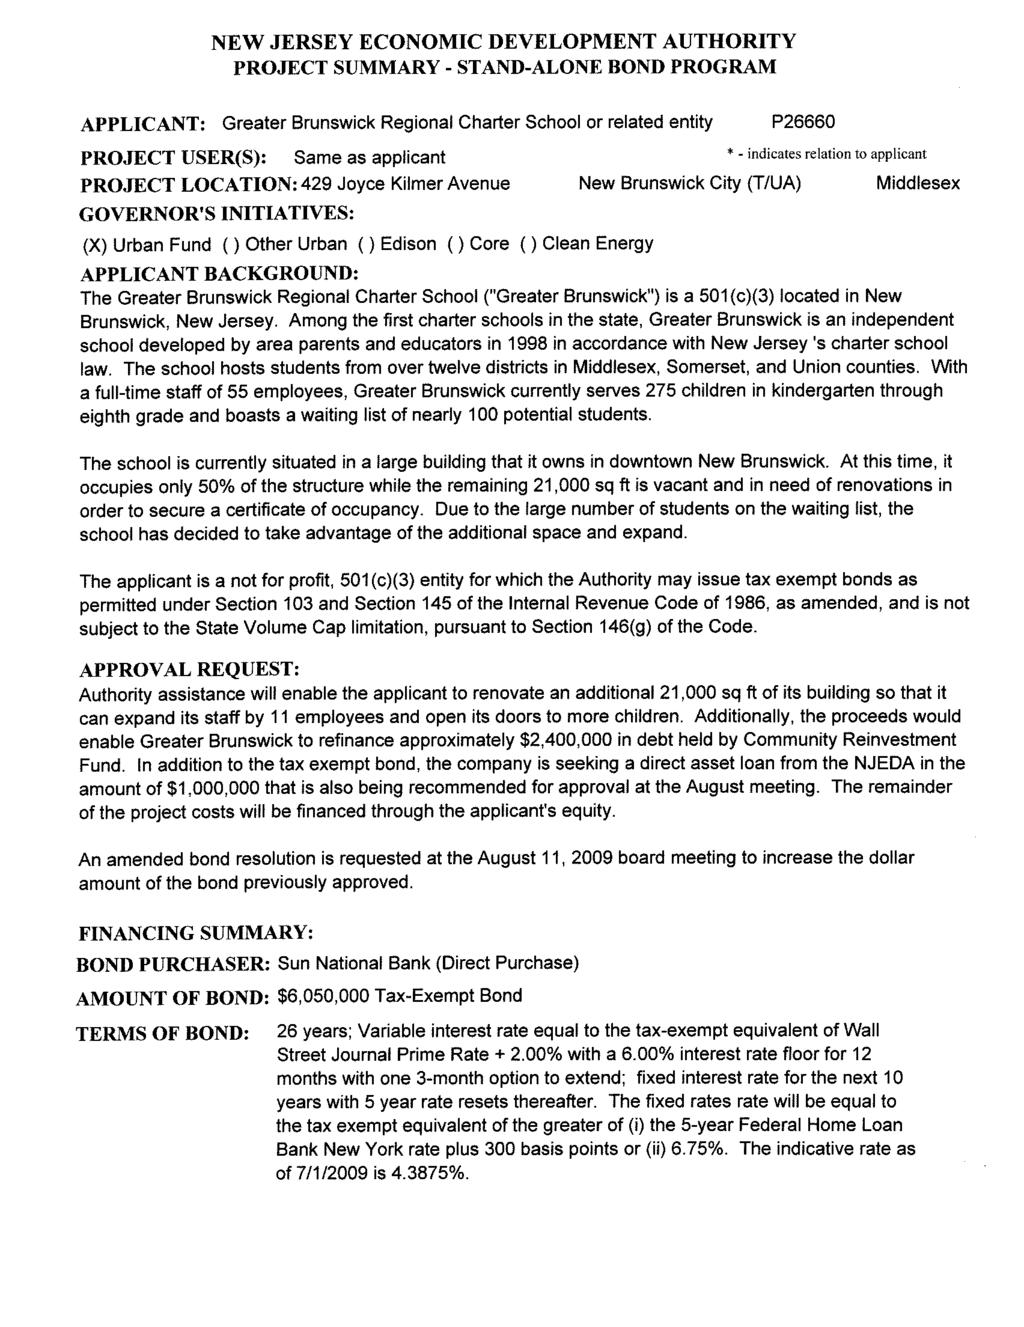 NEW JERSEY ECONOMIC DEVELOPMENT AUTHORITY PROJECT SUMMARY - STAND-ALONE BOND PROGRAM APPLICANT: Greater Brunswick Regional Charter School or related entity P26660 PROJECT USER(S): Same as applicant *